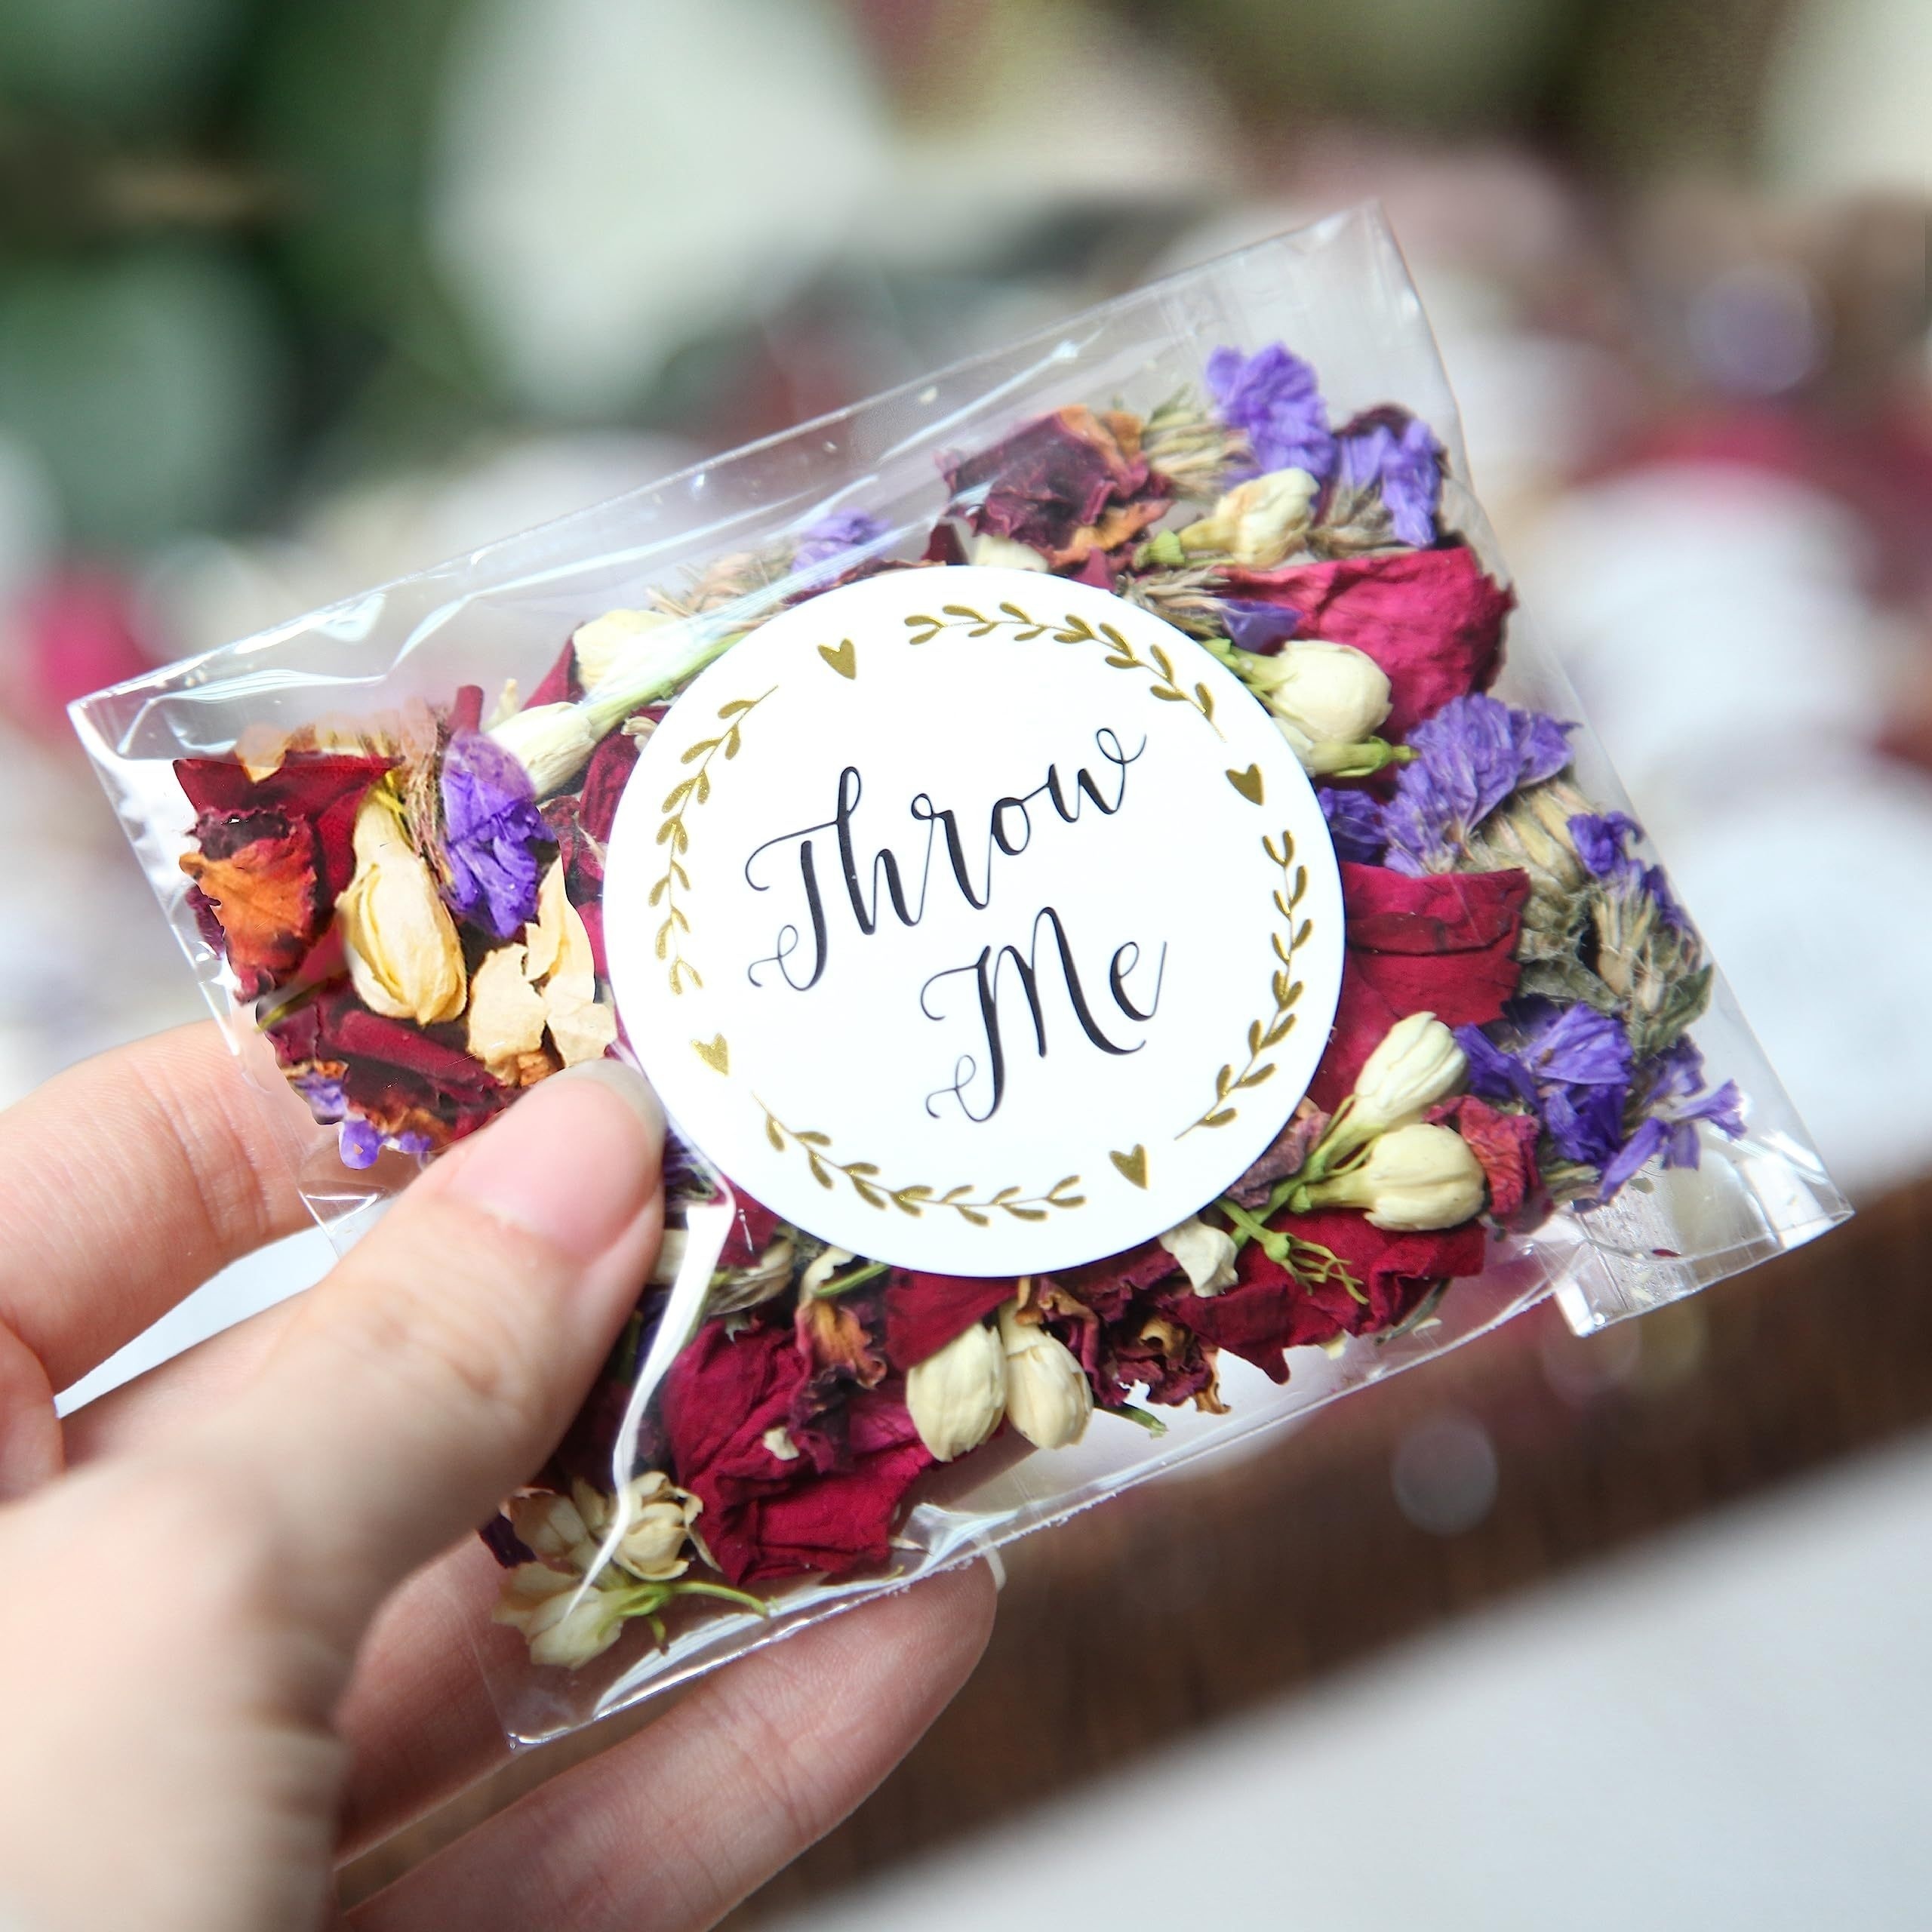 10 Packs Natural Wedding Confetti Throwing Dried Flower Petals